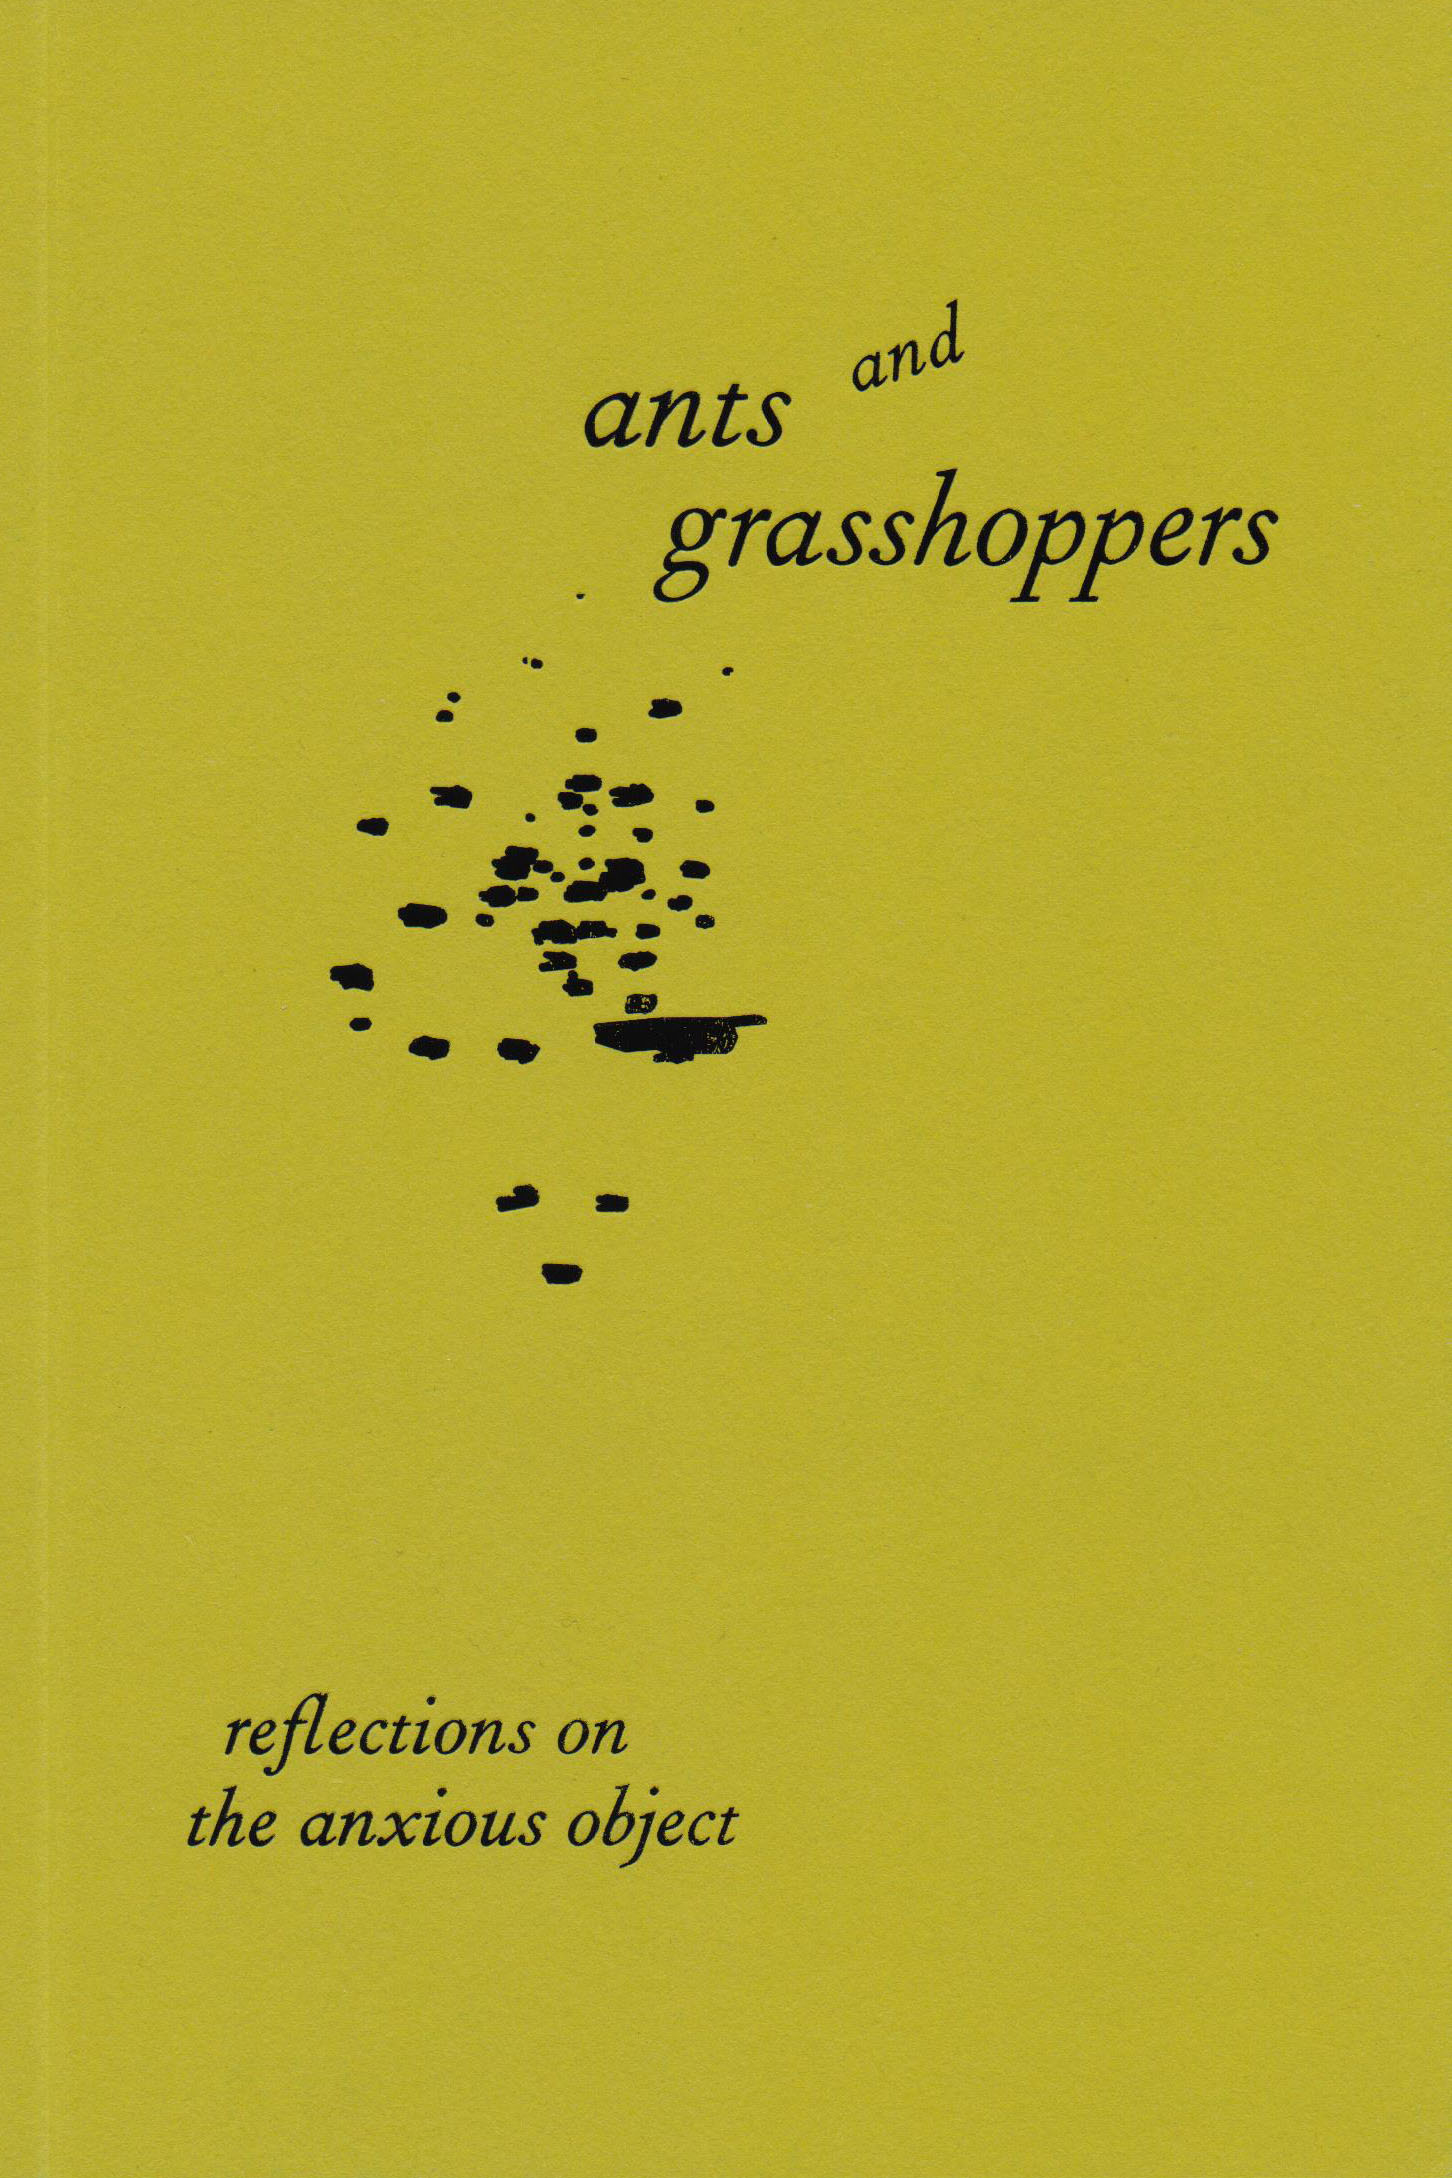  (ANTS AND GRASSHOPPERS: 4)